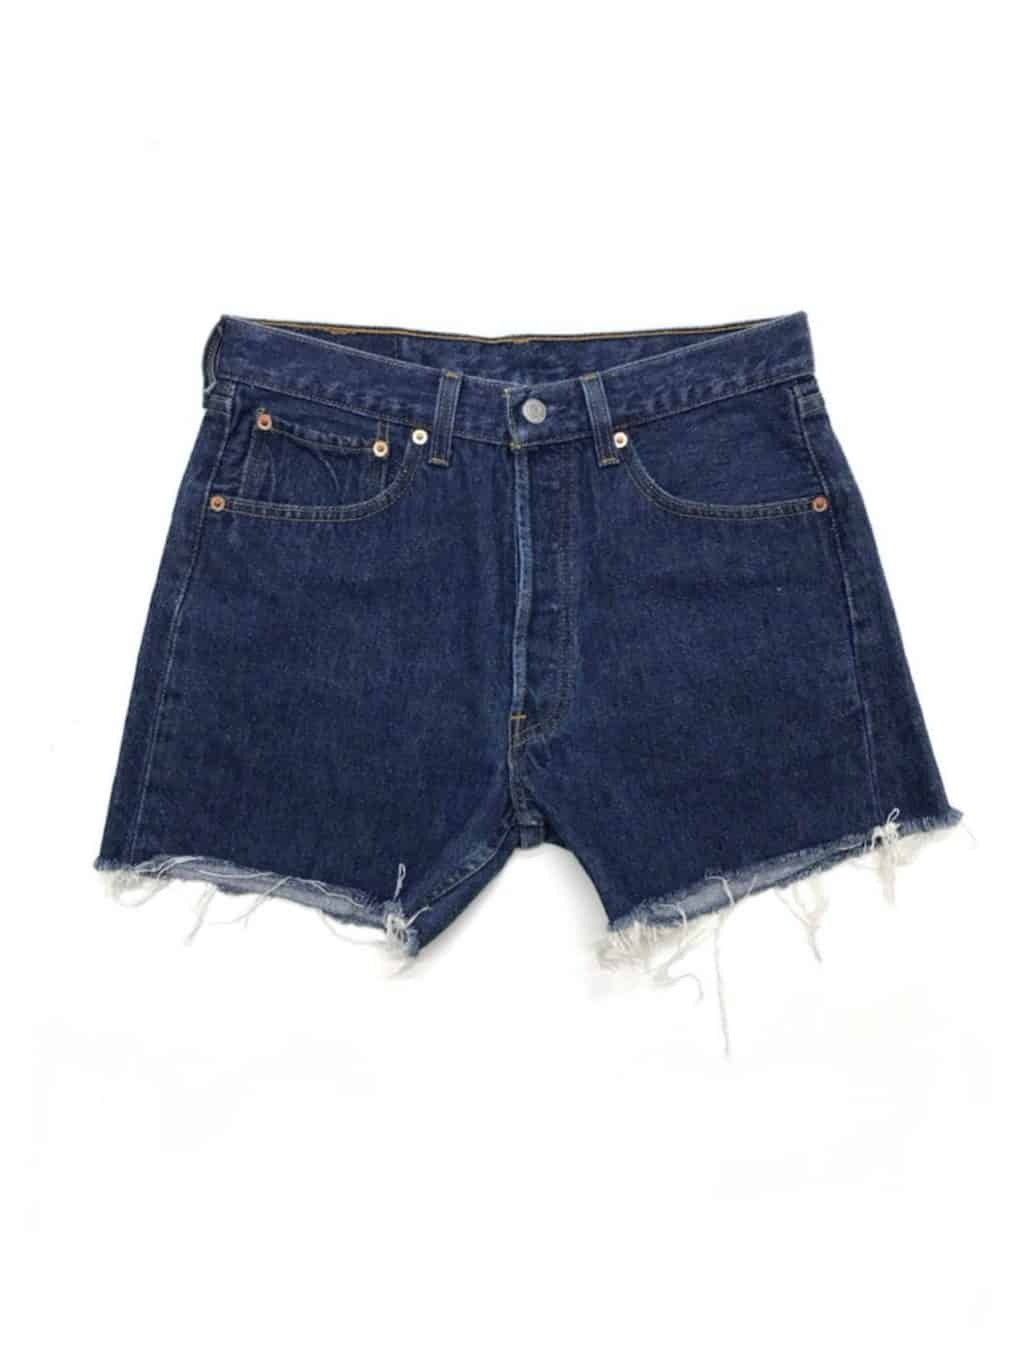 Levis vintage cut-off 501xx shorts in mid-blue. Made in USA - Waist 31” -  St Cyr Vintage